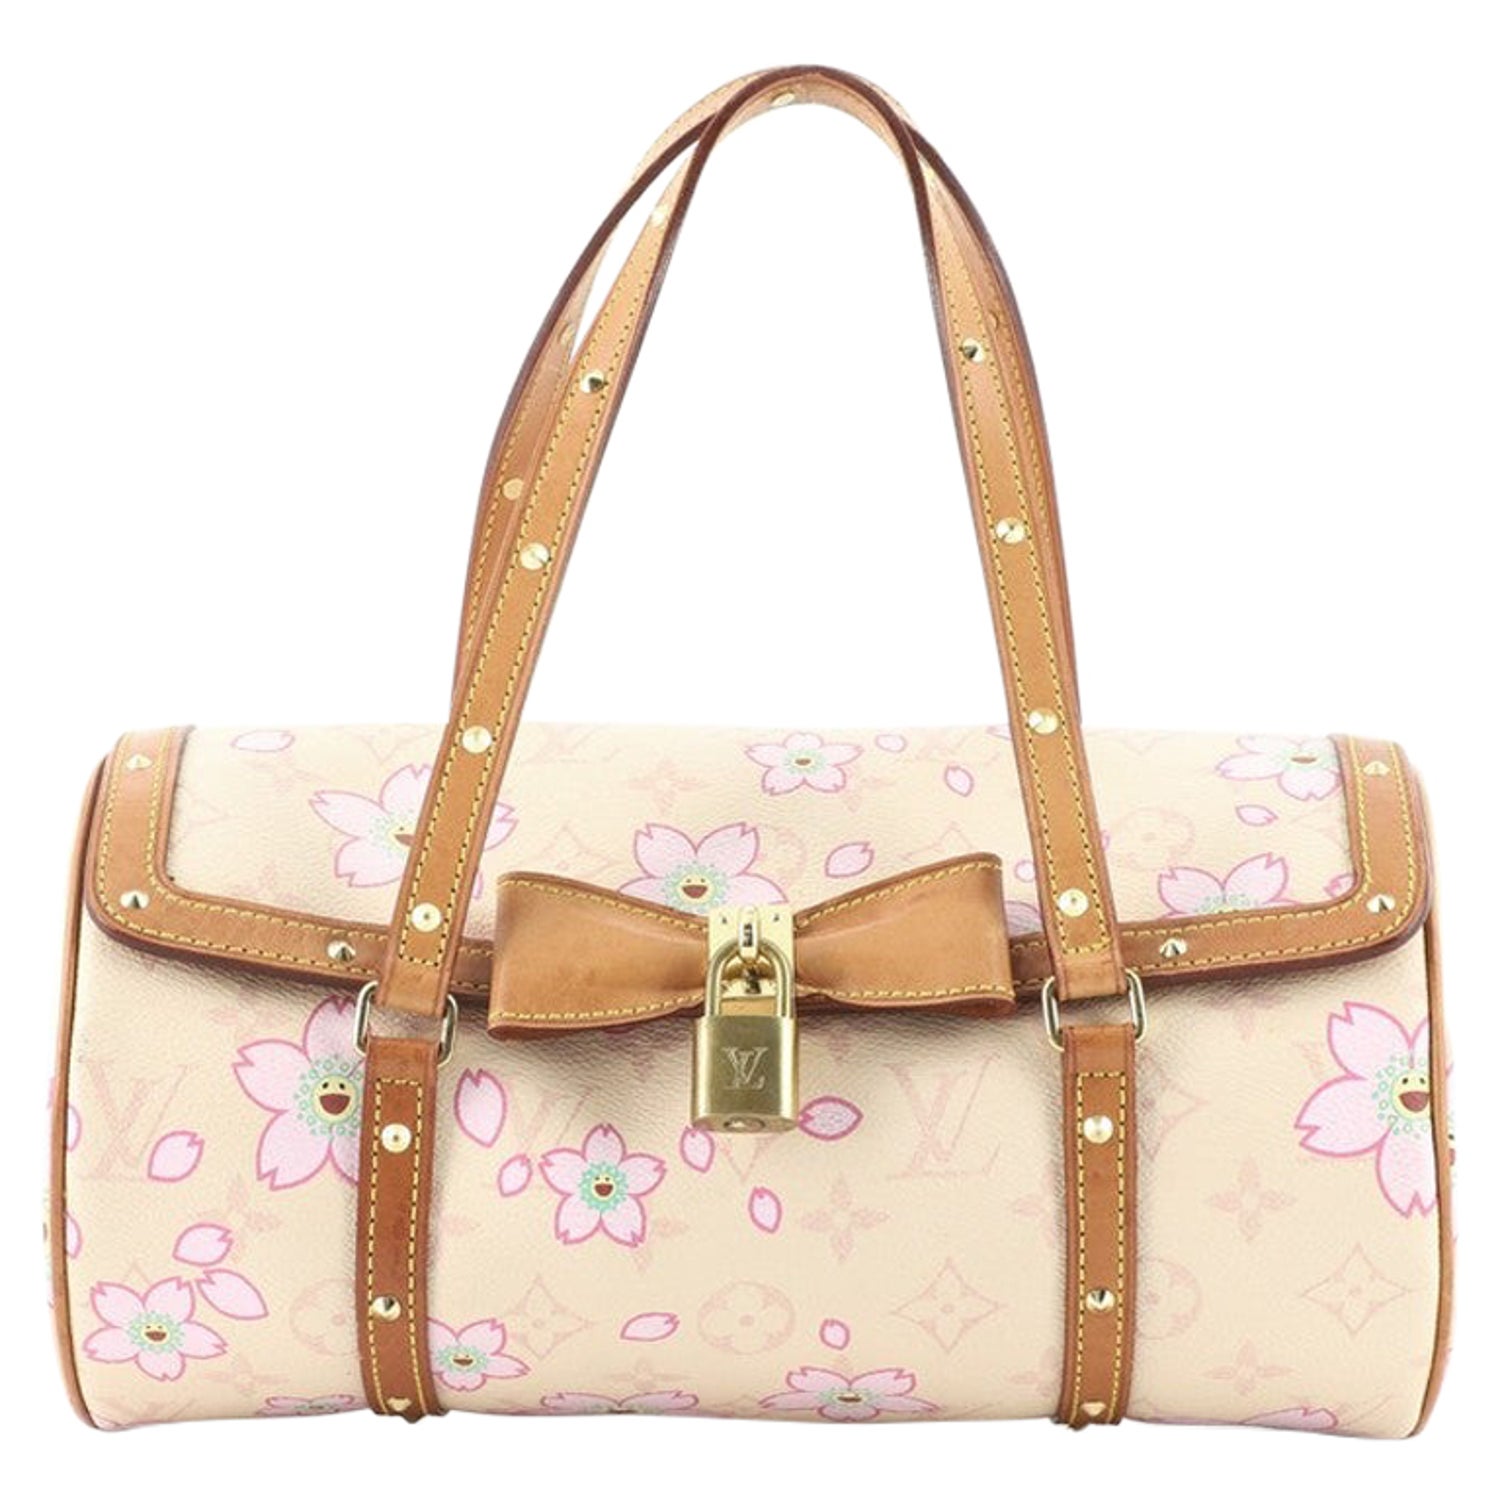 LOUIS VUITTON CHERRY BLOSSOM BAG? My 1st time at this THRIFT STORE